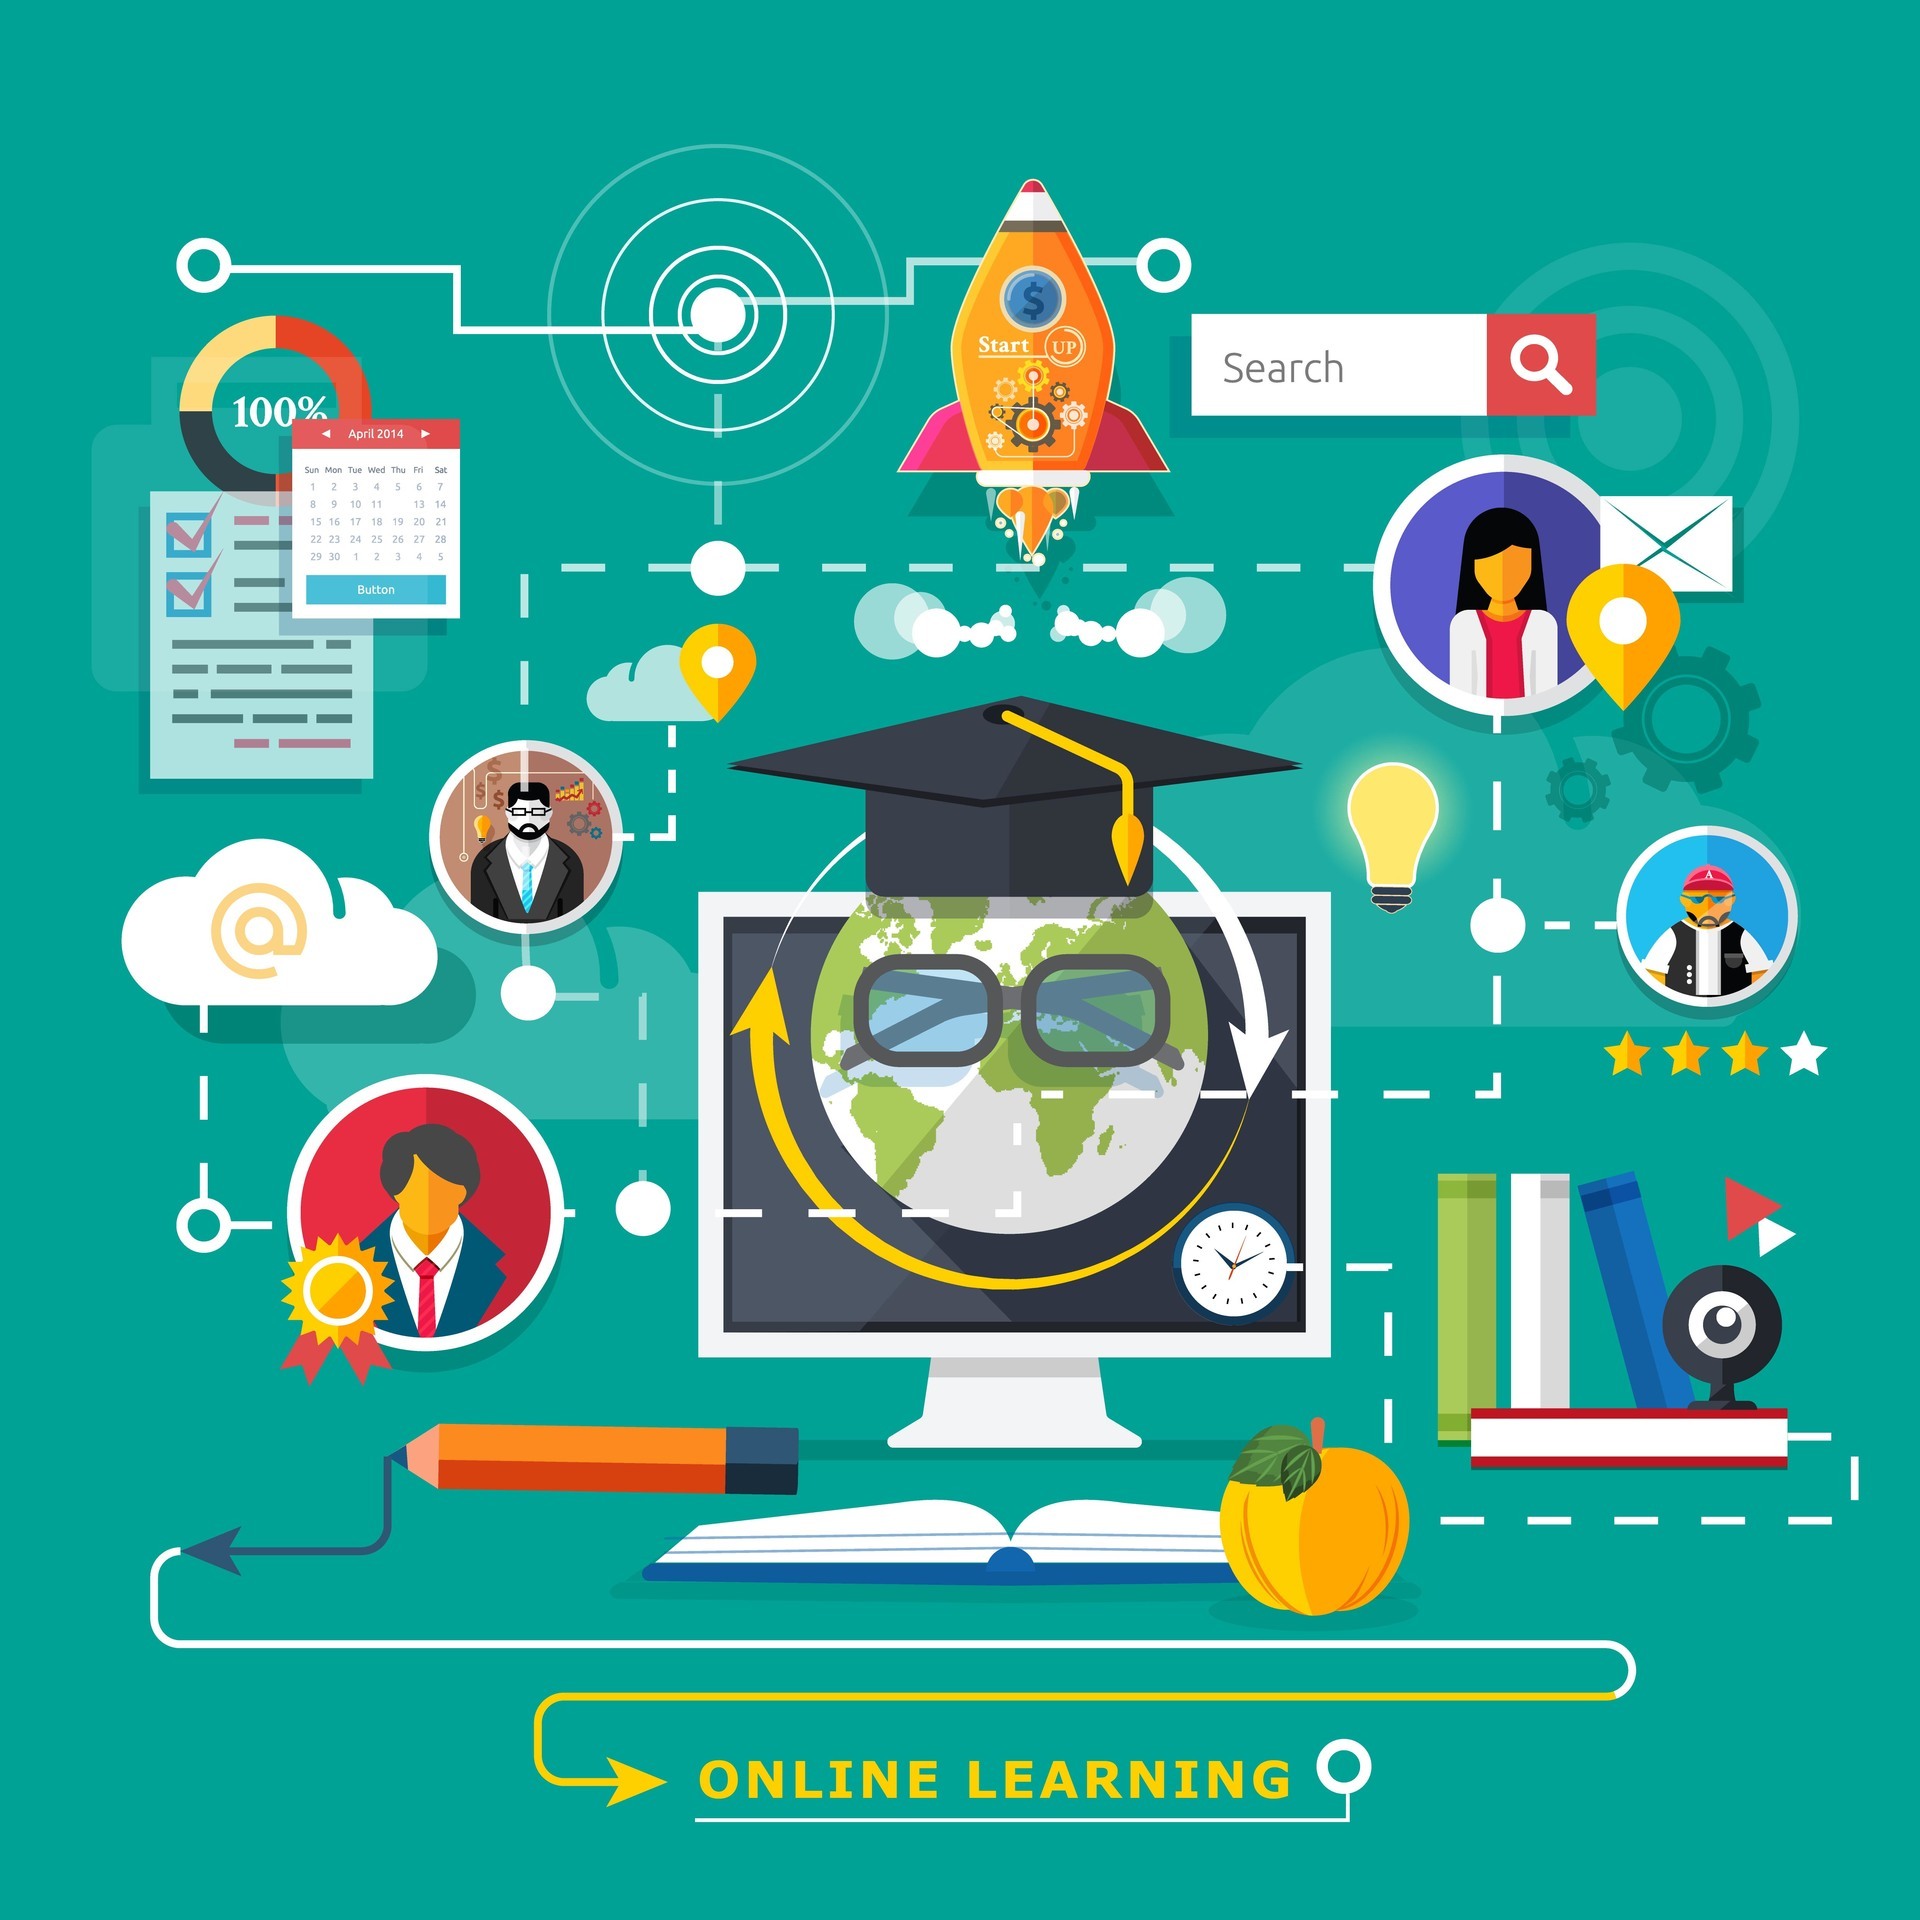 Online Learning Is About Activities